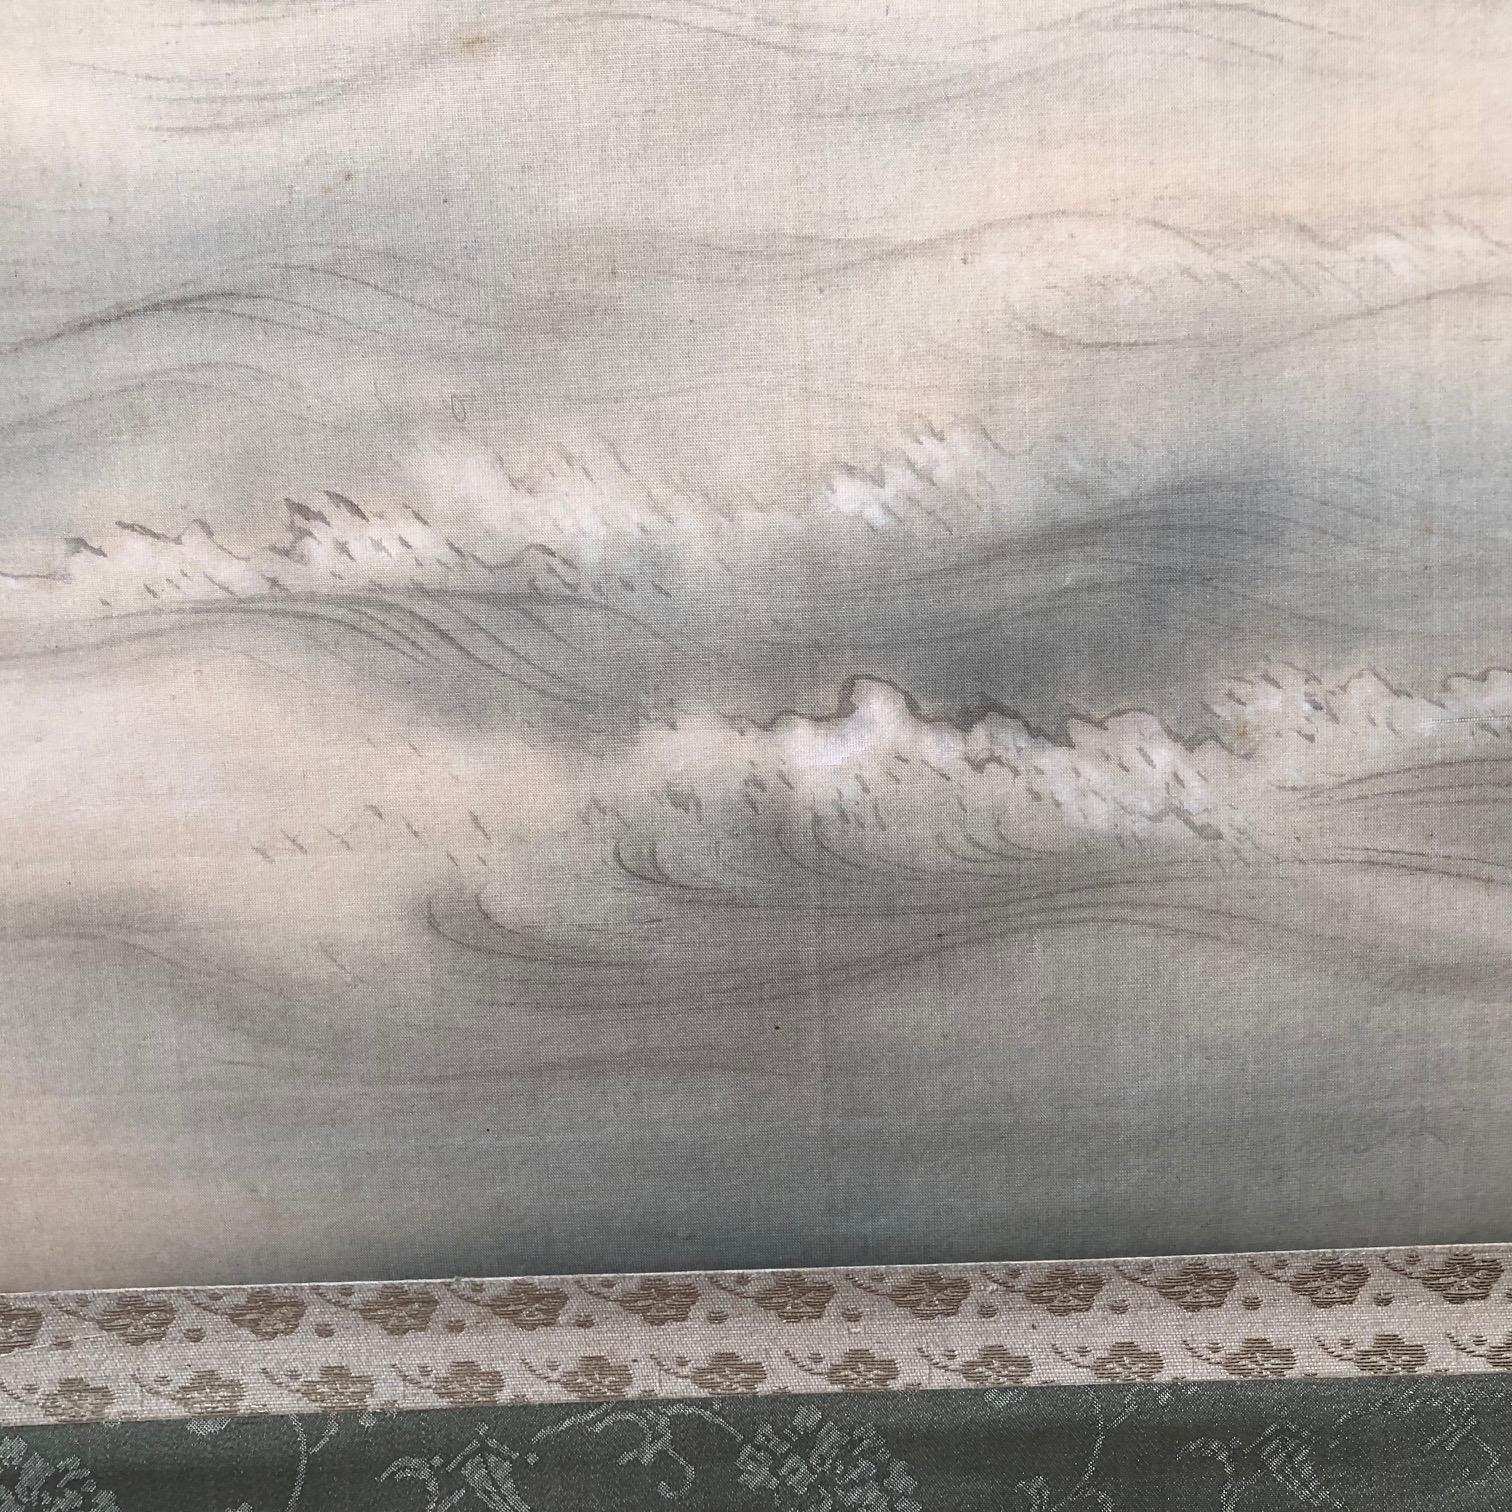  Sun and Waves Japanese Antique Hand-Painted Silk Scroll, Meiji 19th Century 3